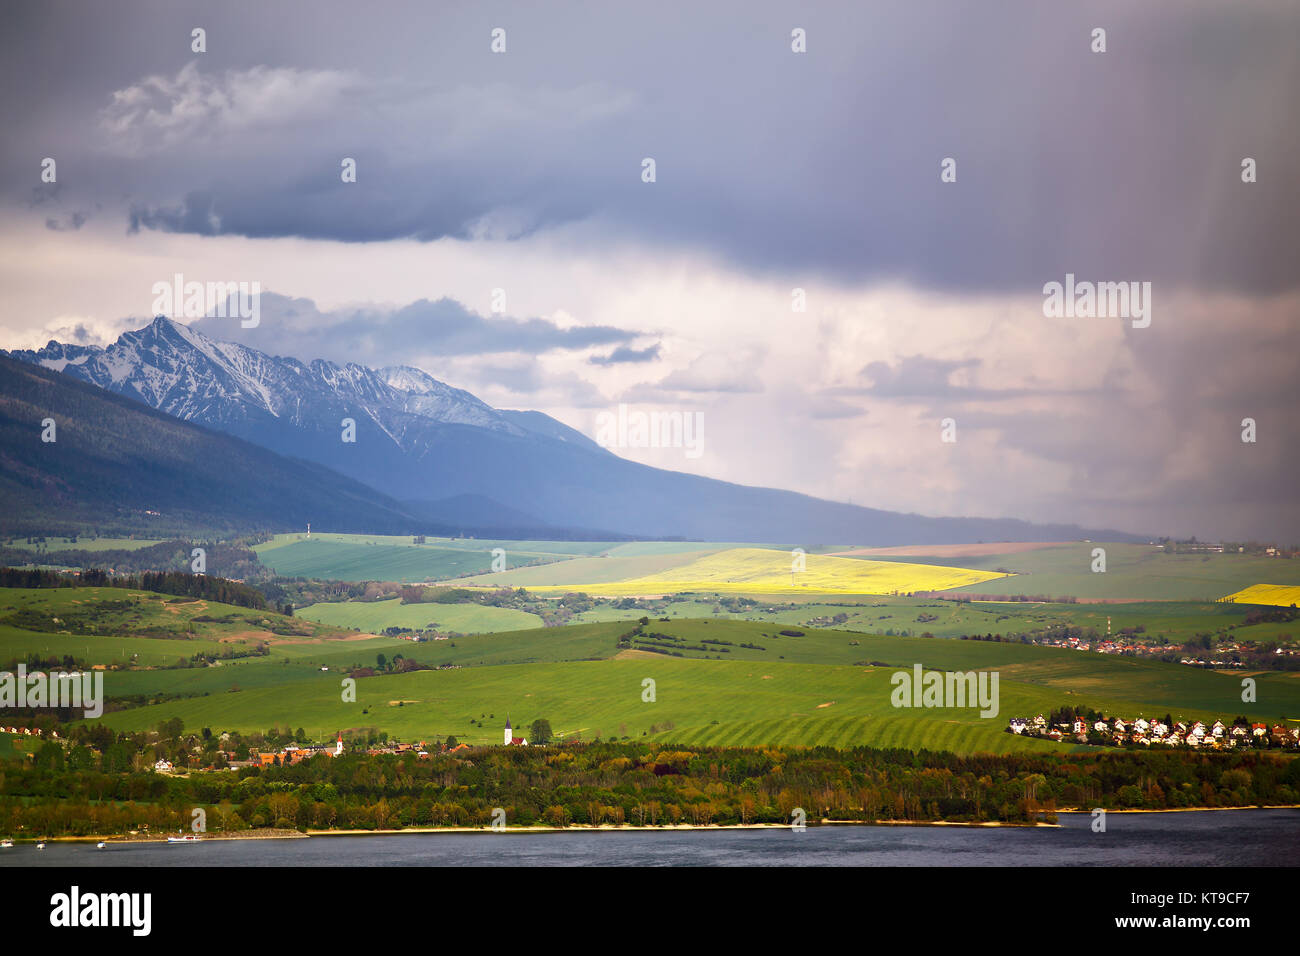 Town on the lake behind the foothills. Spring rain and storm in mountains Stock Photo